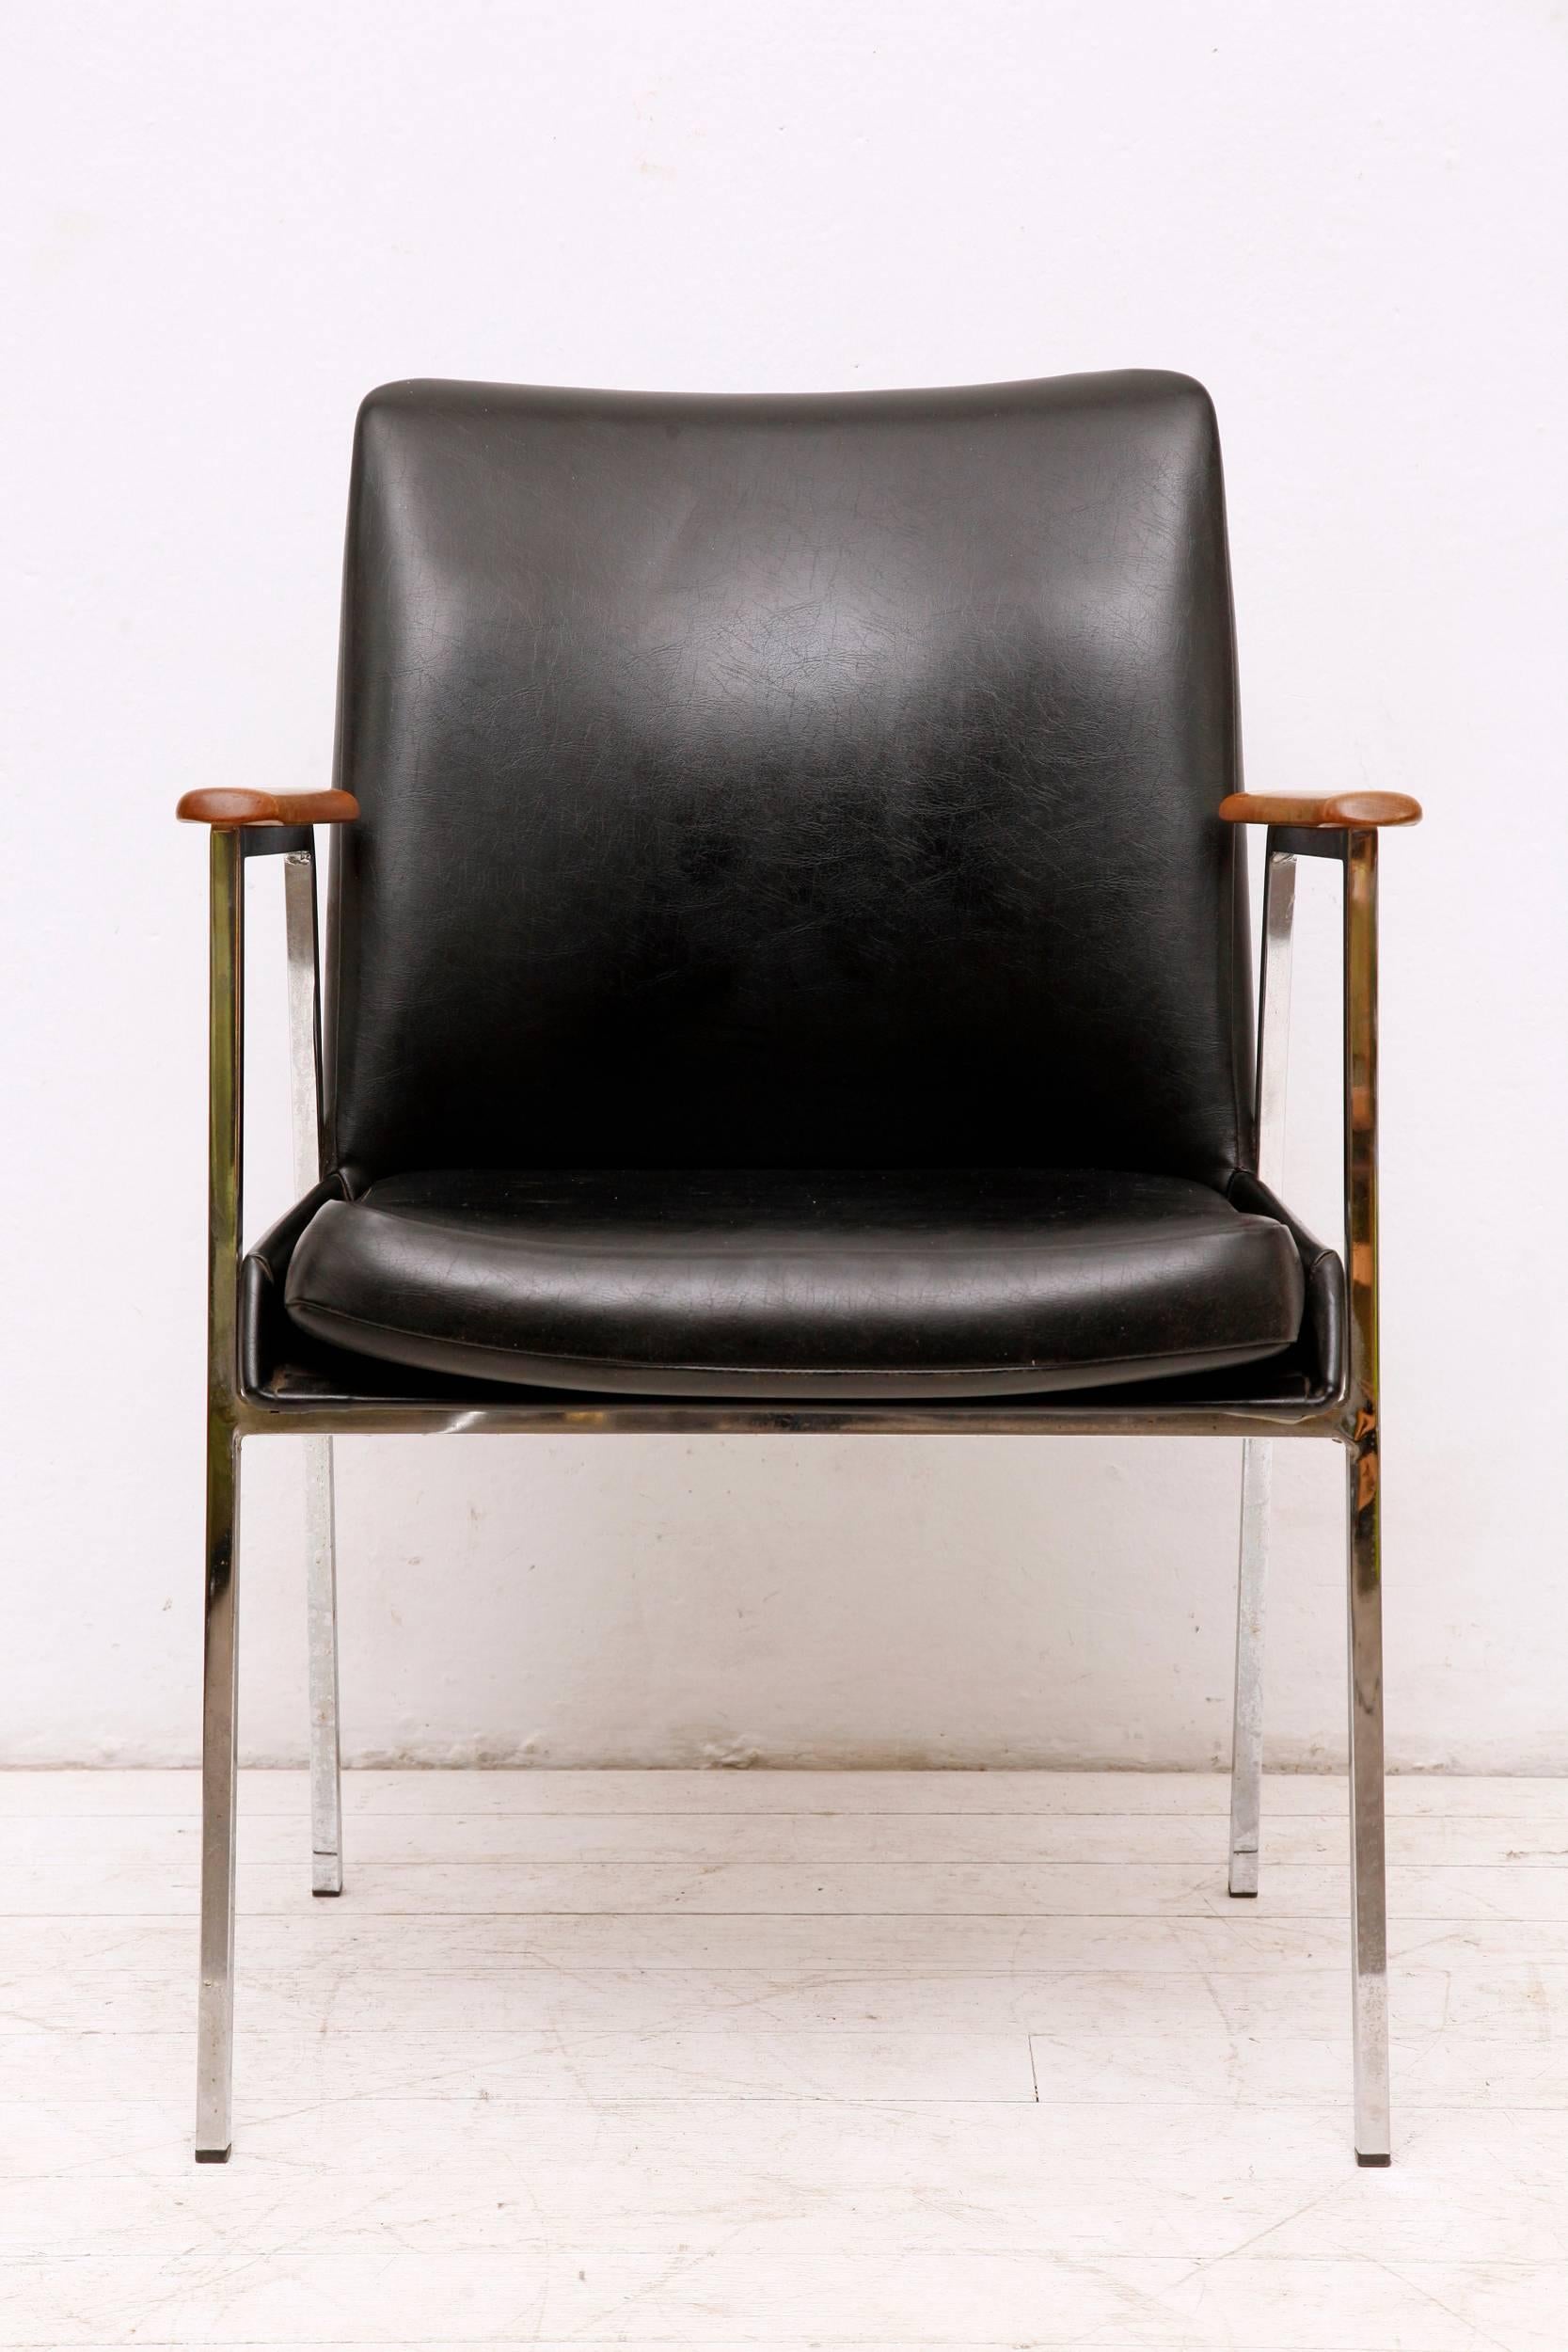 Mid-Century Modern (1960s) black armchair was manufactured by Mauser. The chair is in original condition. Seat and back are covered with dark faux leather, armrests are made of lacquered wood. The steel tube frame shows age-related